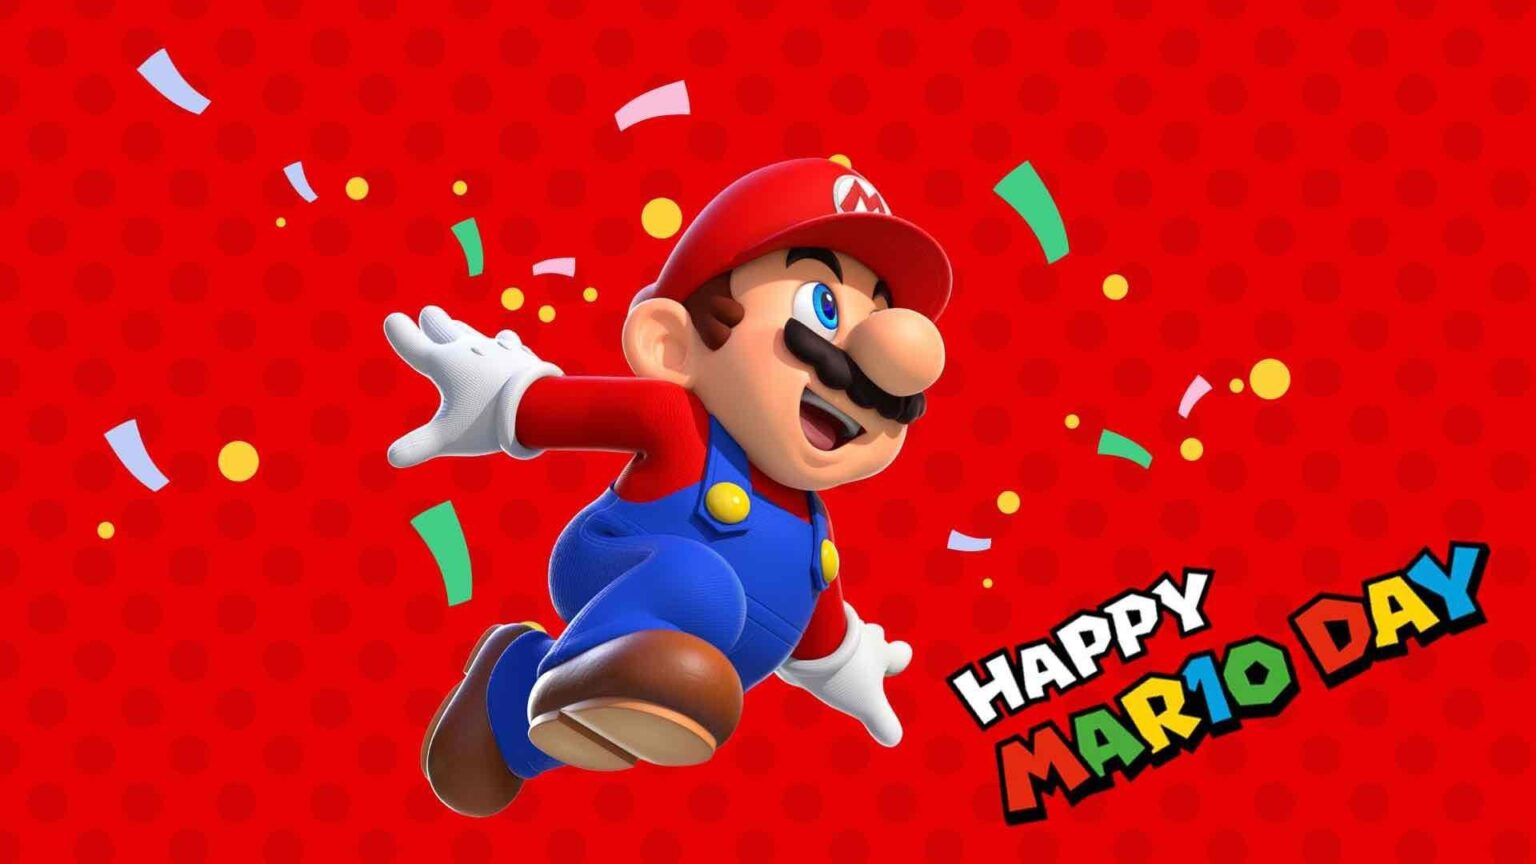 It’s-a-Mario-Day! That’s right – it’s March 10th (aka MAR10) and we’re ready to party with Mario by sharing these super Super Mario memes.